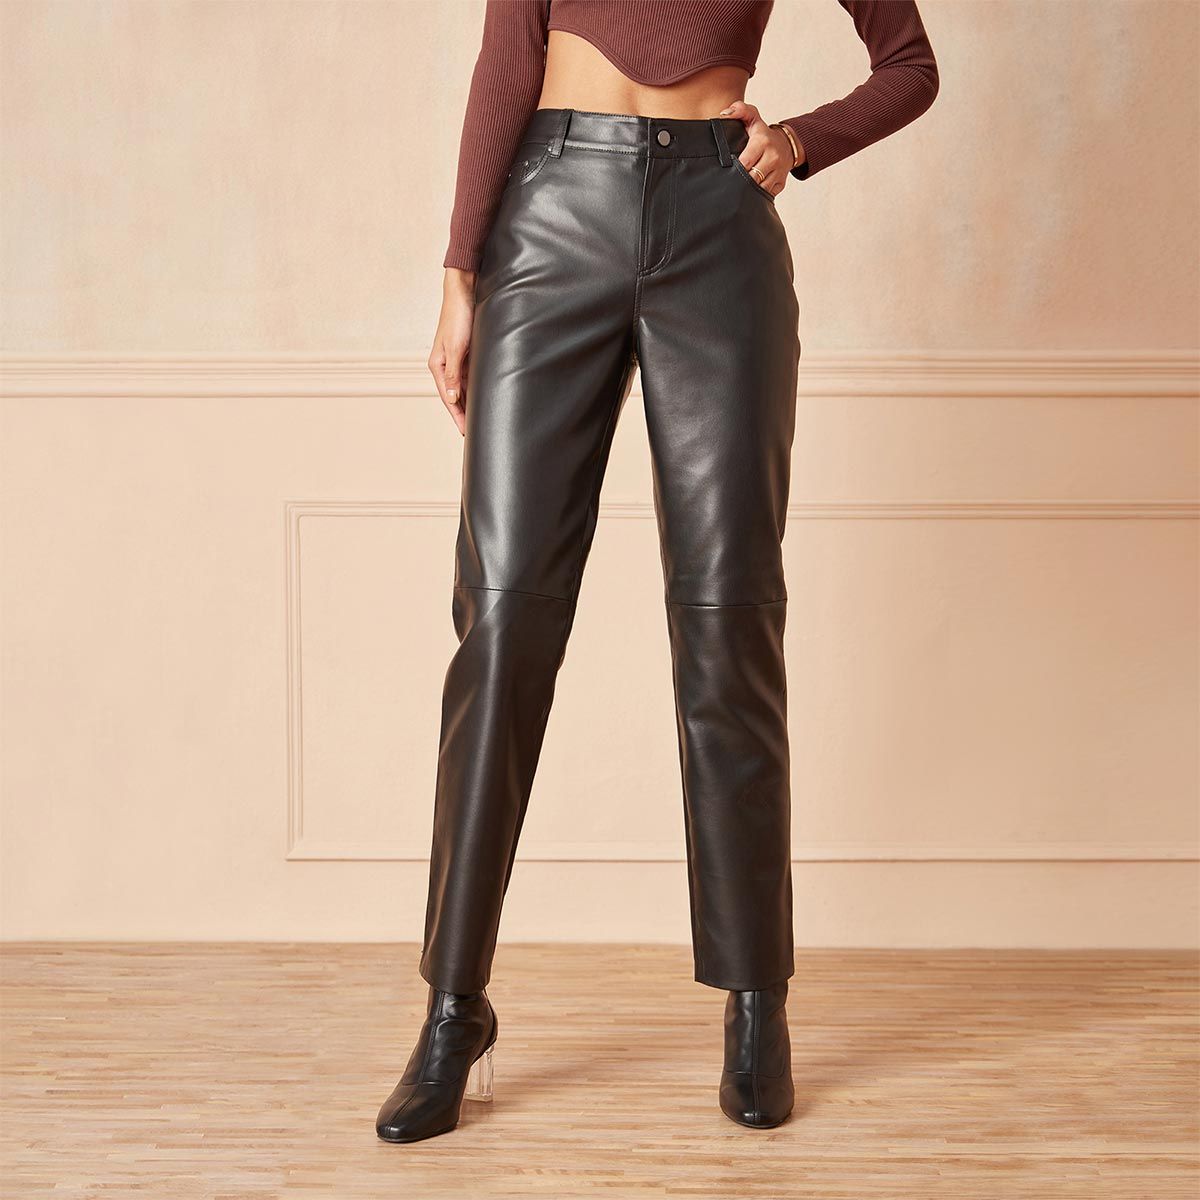 Stylish Leather Pants with a Funky Belt  Shop Now